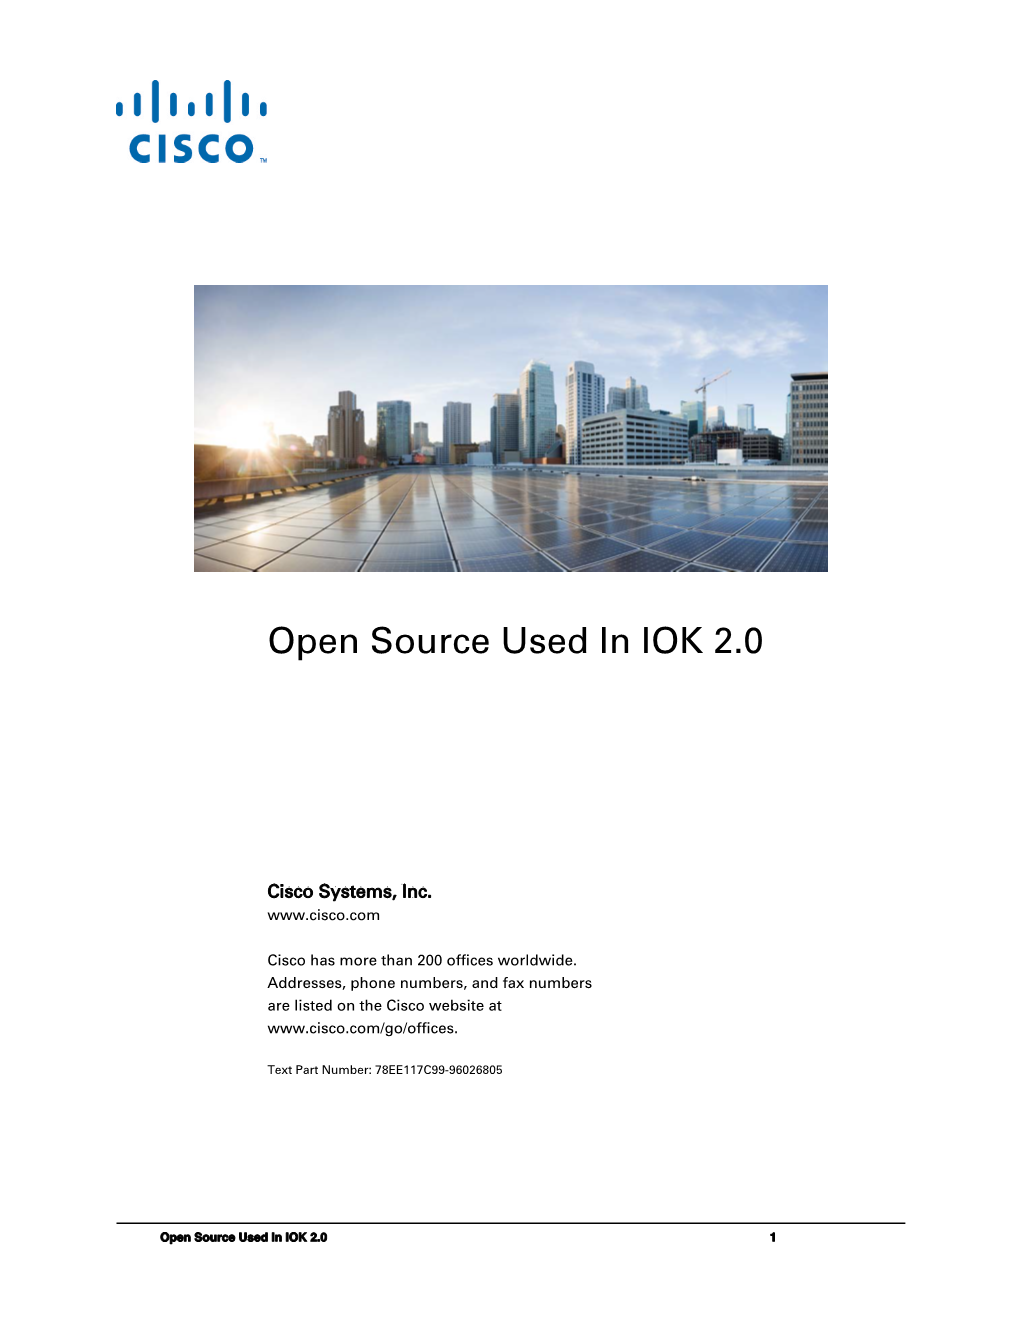 Open Source Used in Cisco IOK